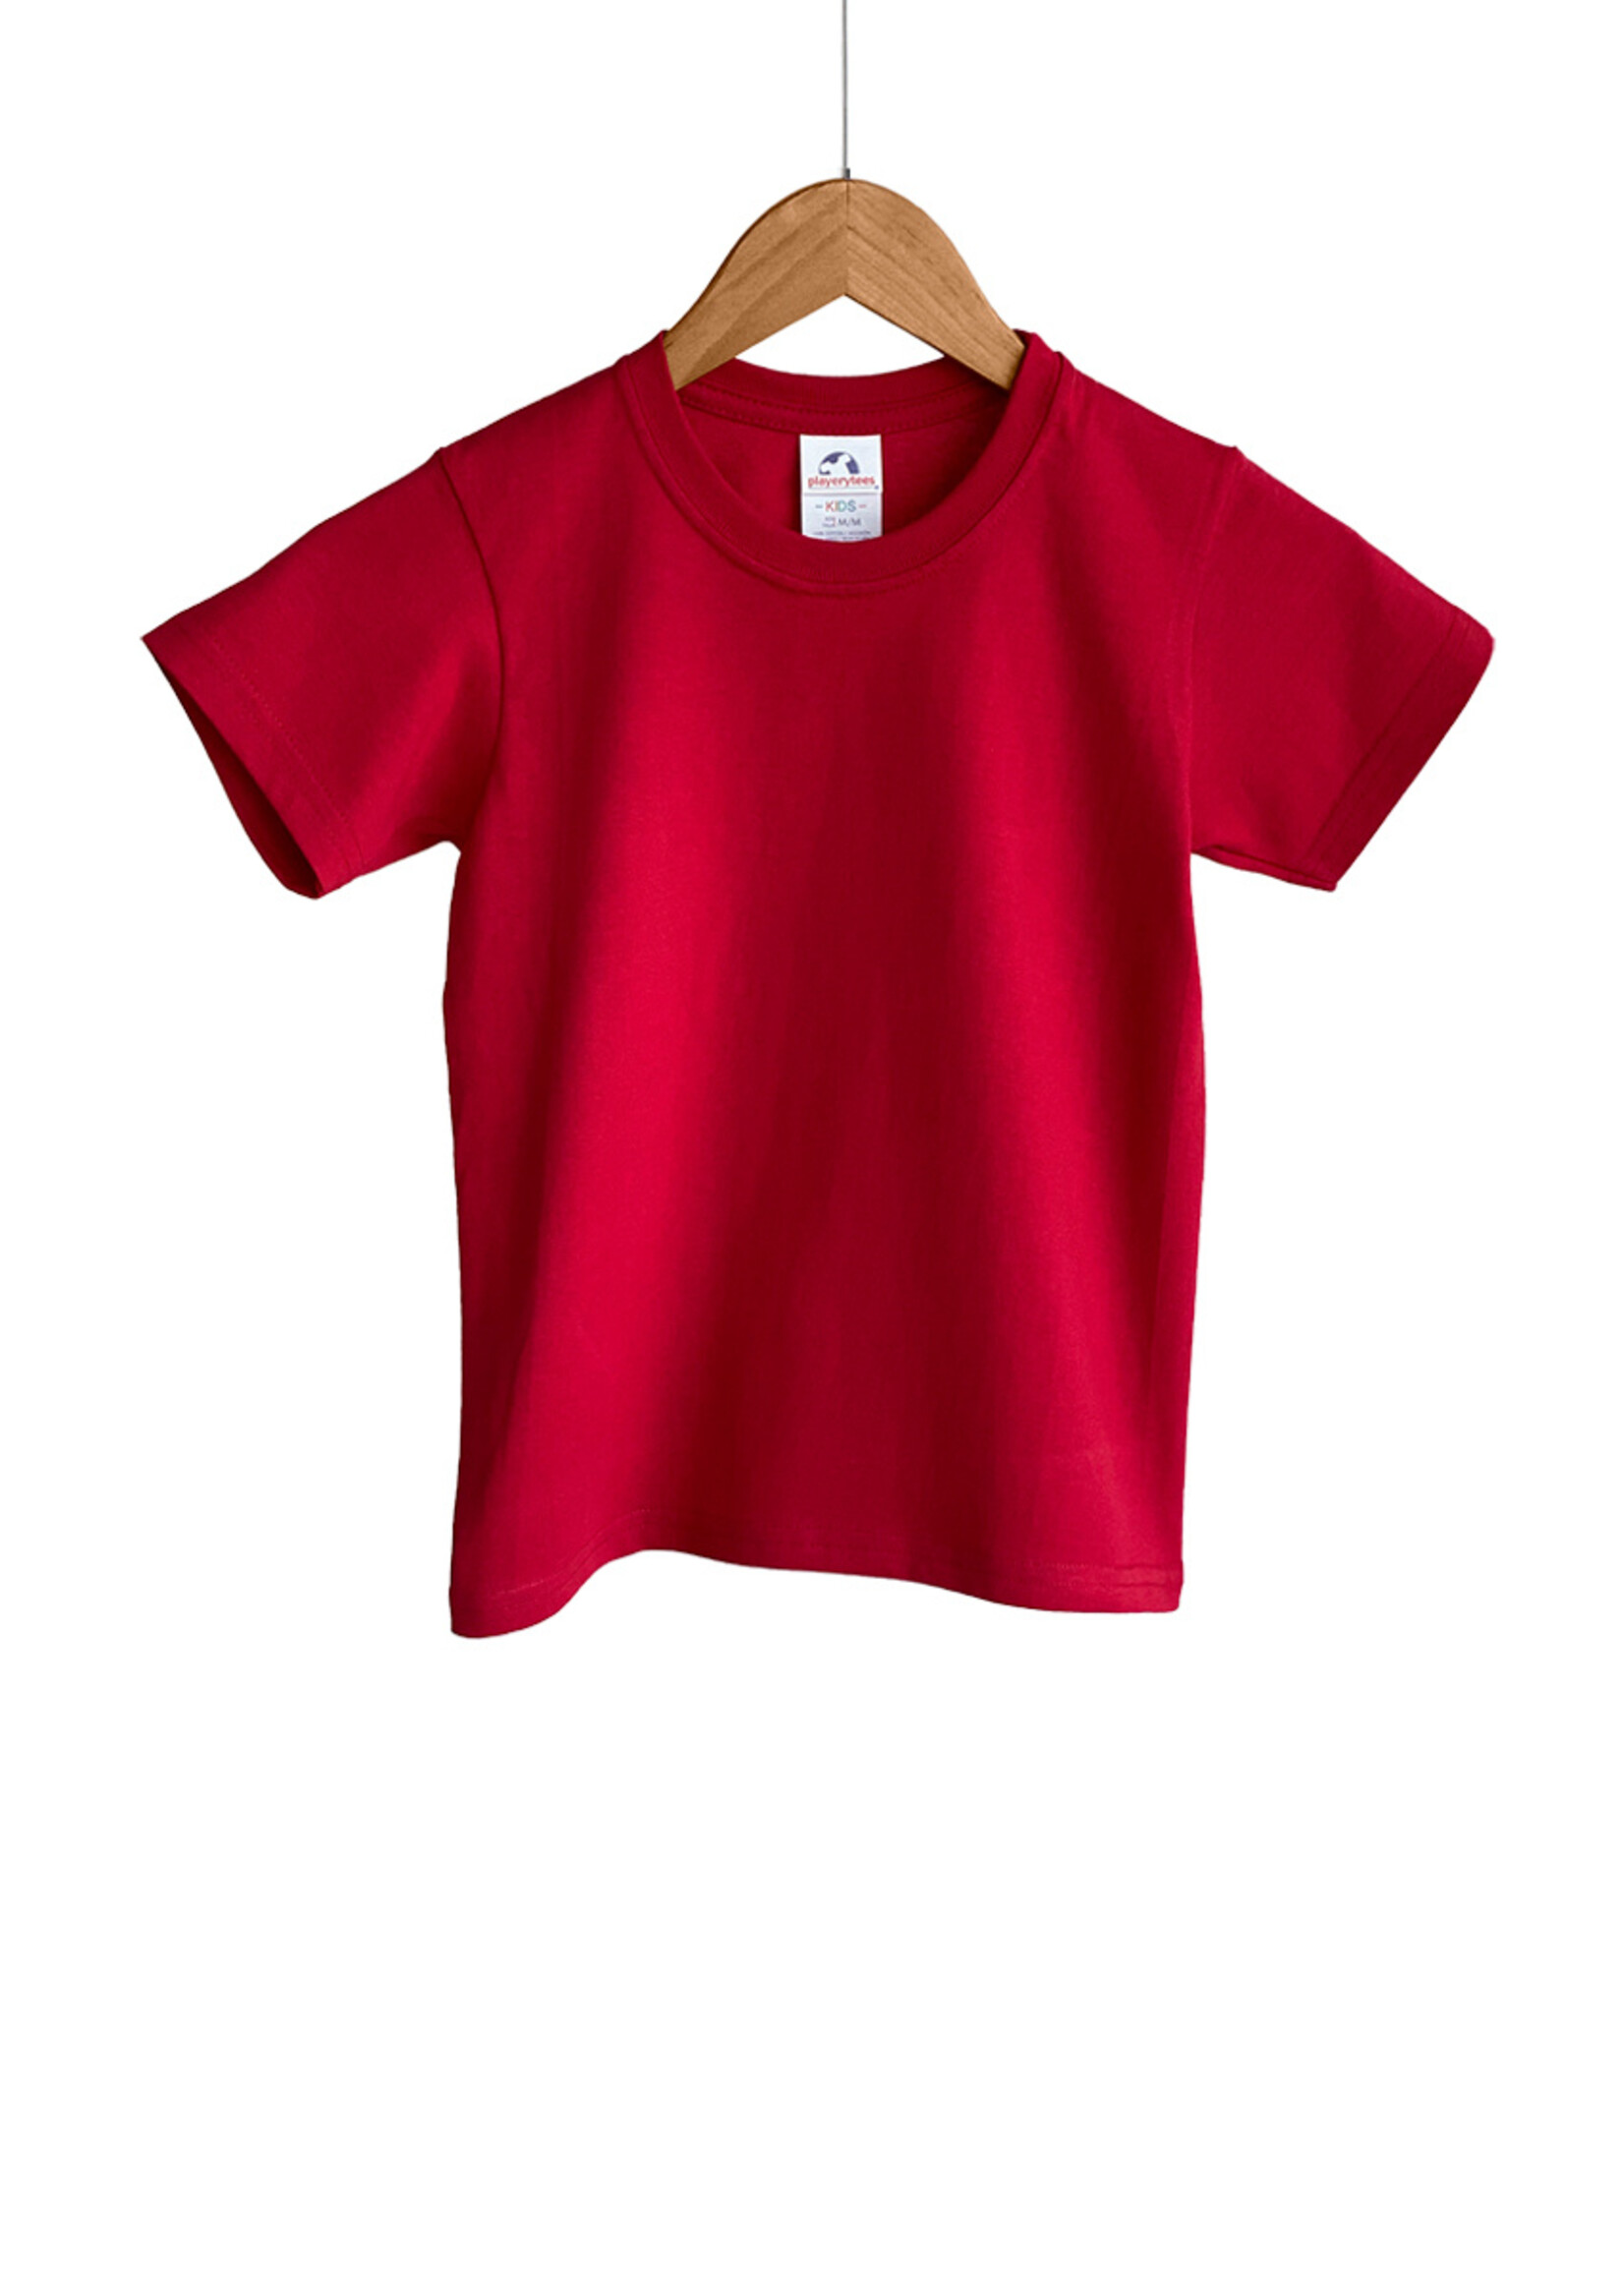 Playerytees STYLE 410N - OPEN END CREW NECK 100 % COTTON